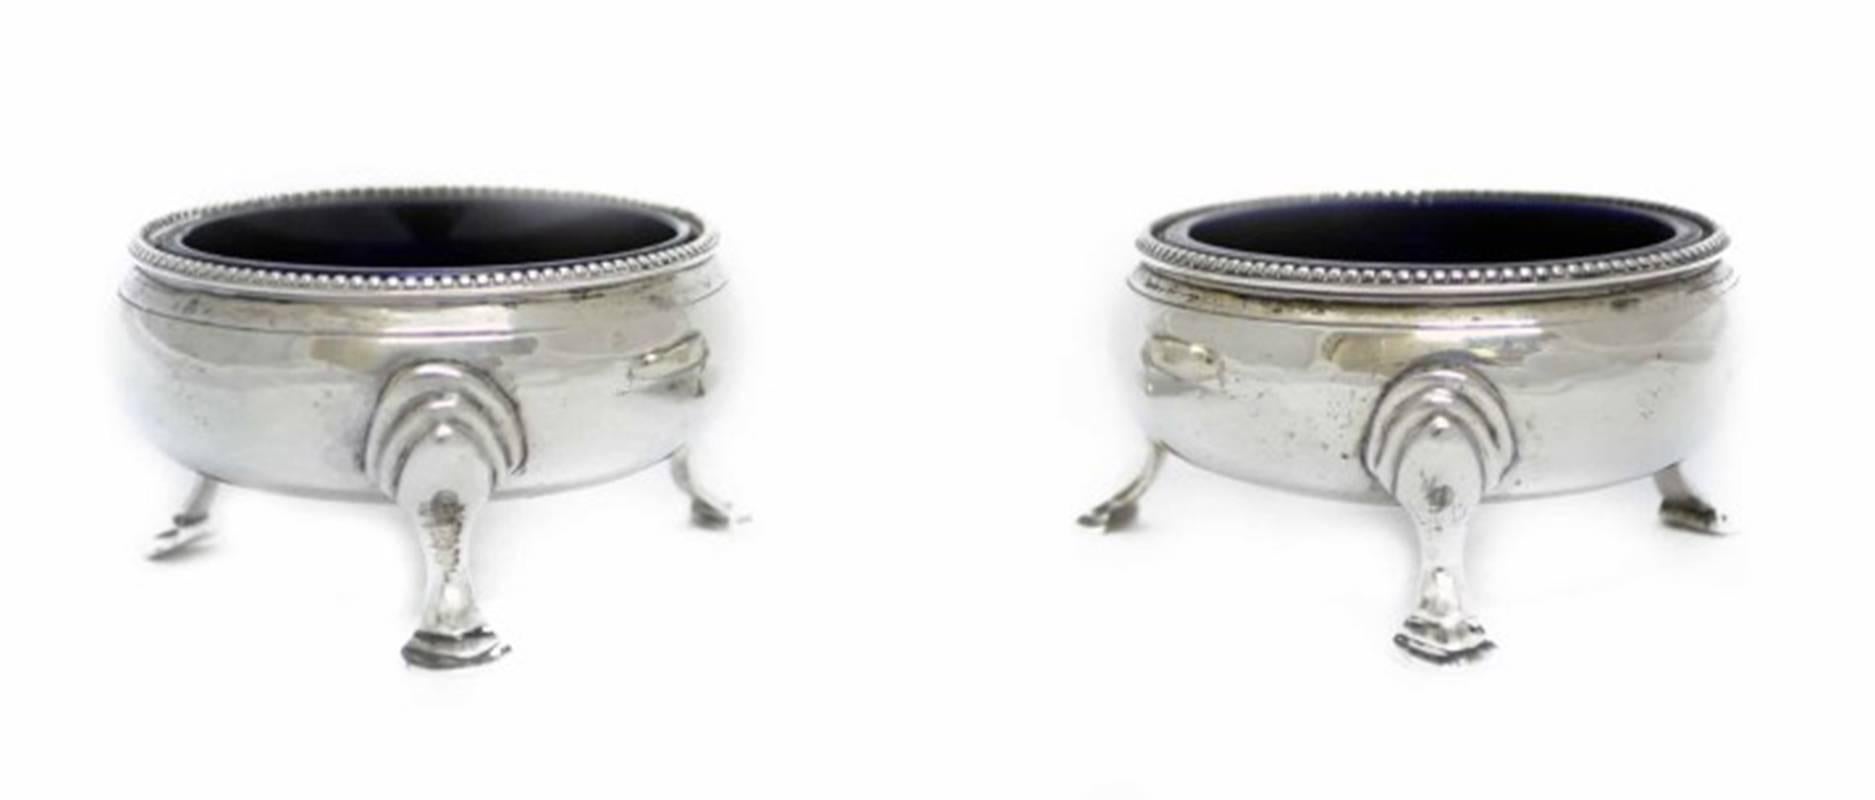 This is a stylish pair of antique solid sterling salt dishes by the renowned silversmith Hester Bateman with hallmarks for 1770.

This pair is masterfully crafted in sterling silver. They stand on three Queen Anne Hoof feet and have beaded